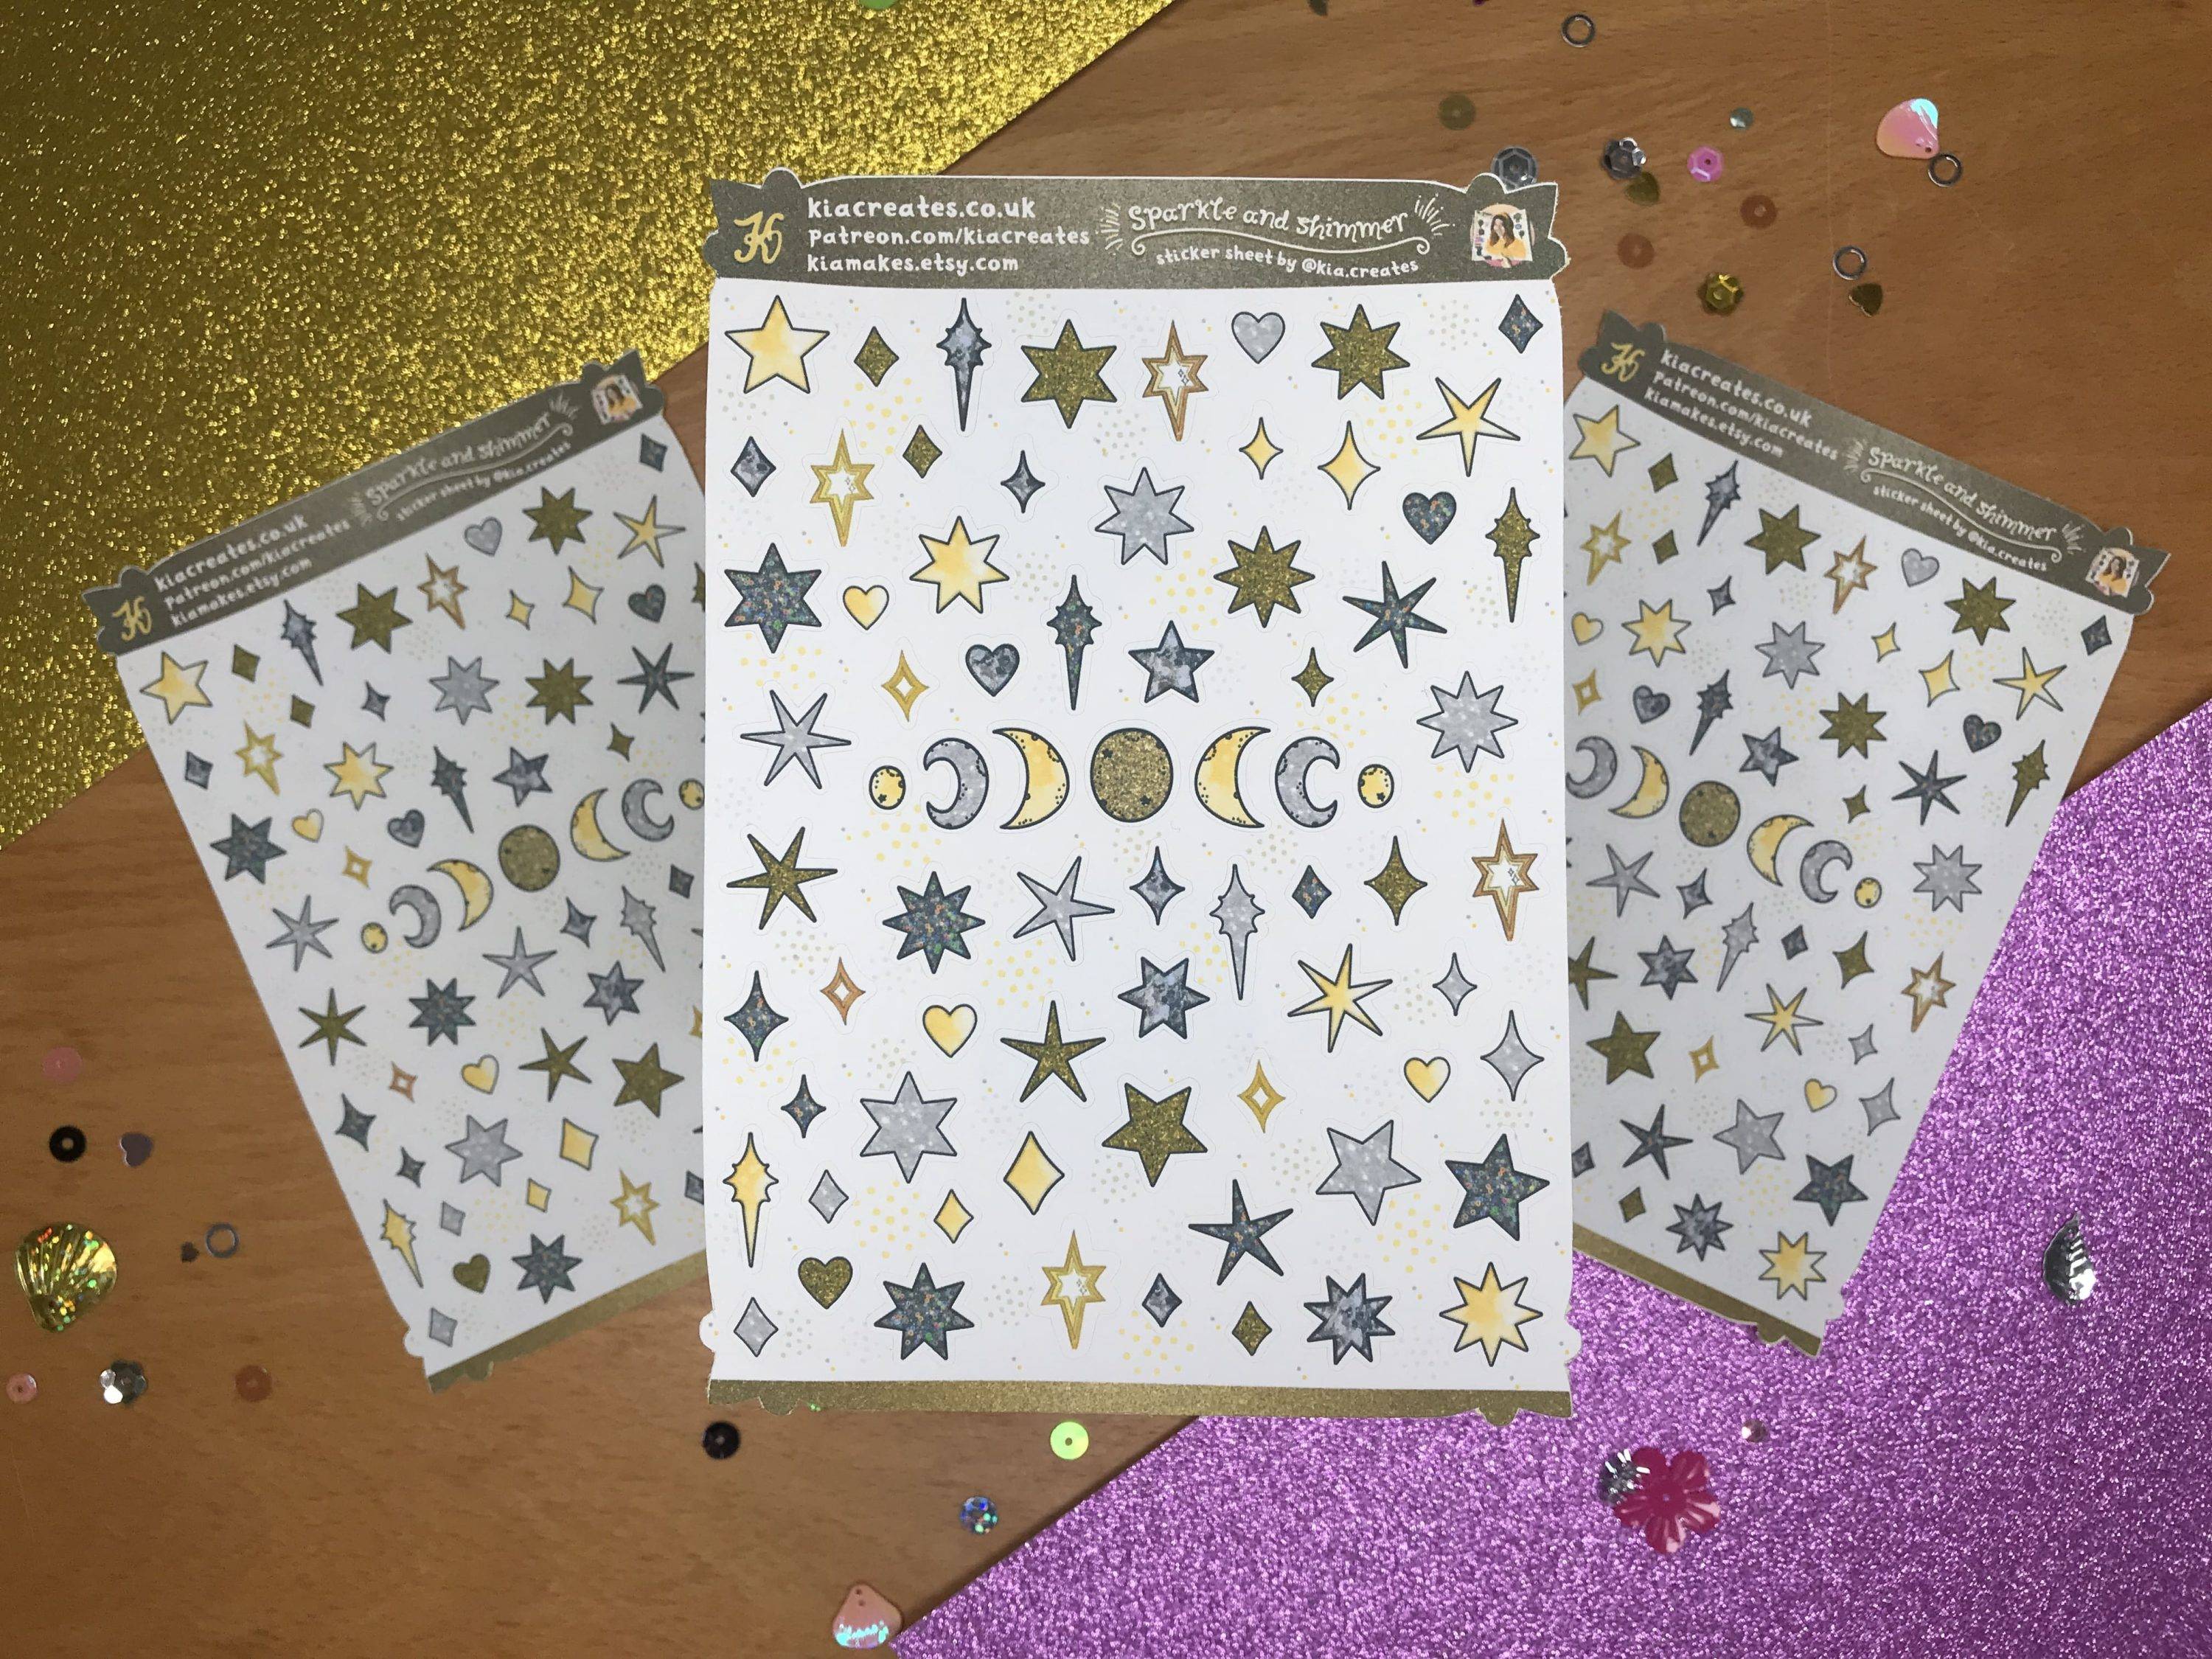 Sparkle and Shimmer Stickers - Diamond and Star Doodle Stickers - Decorative Planner Stickers